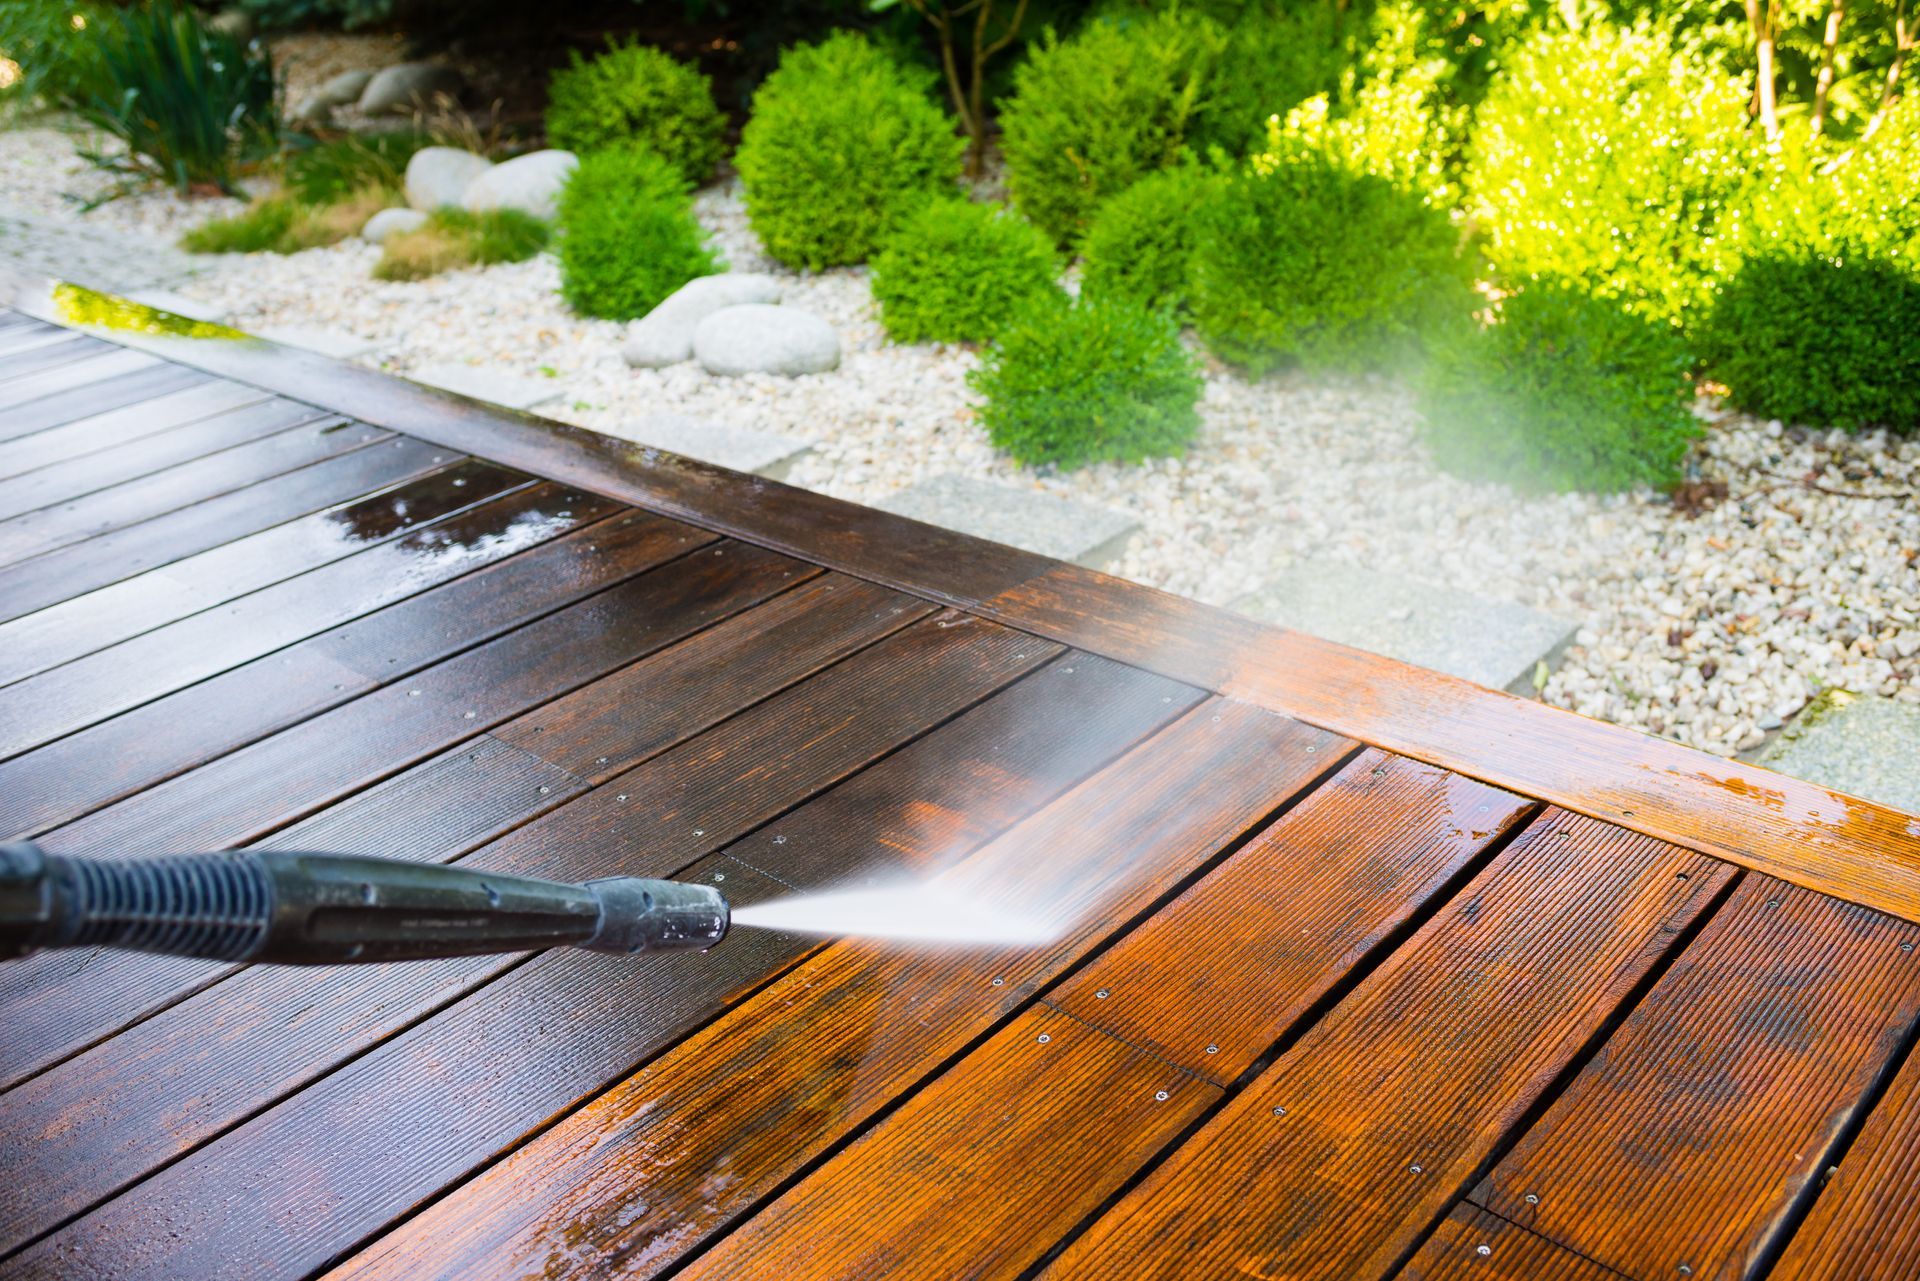 a person is using a high pressure washer to clean a wooden deck